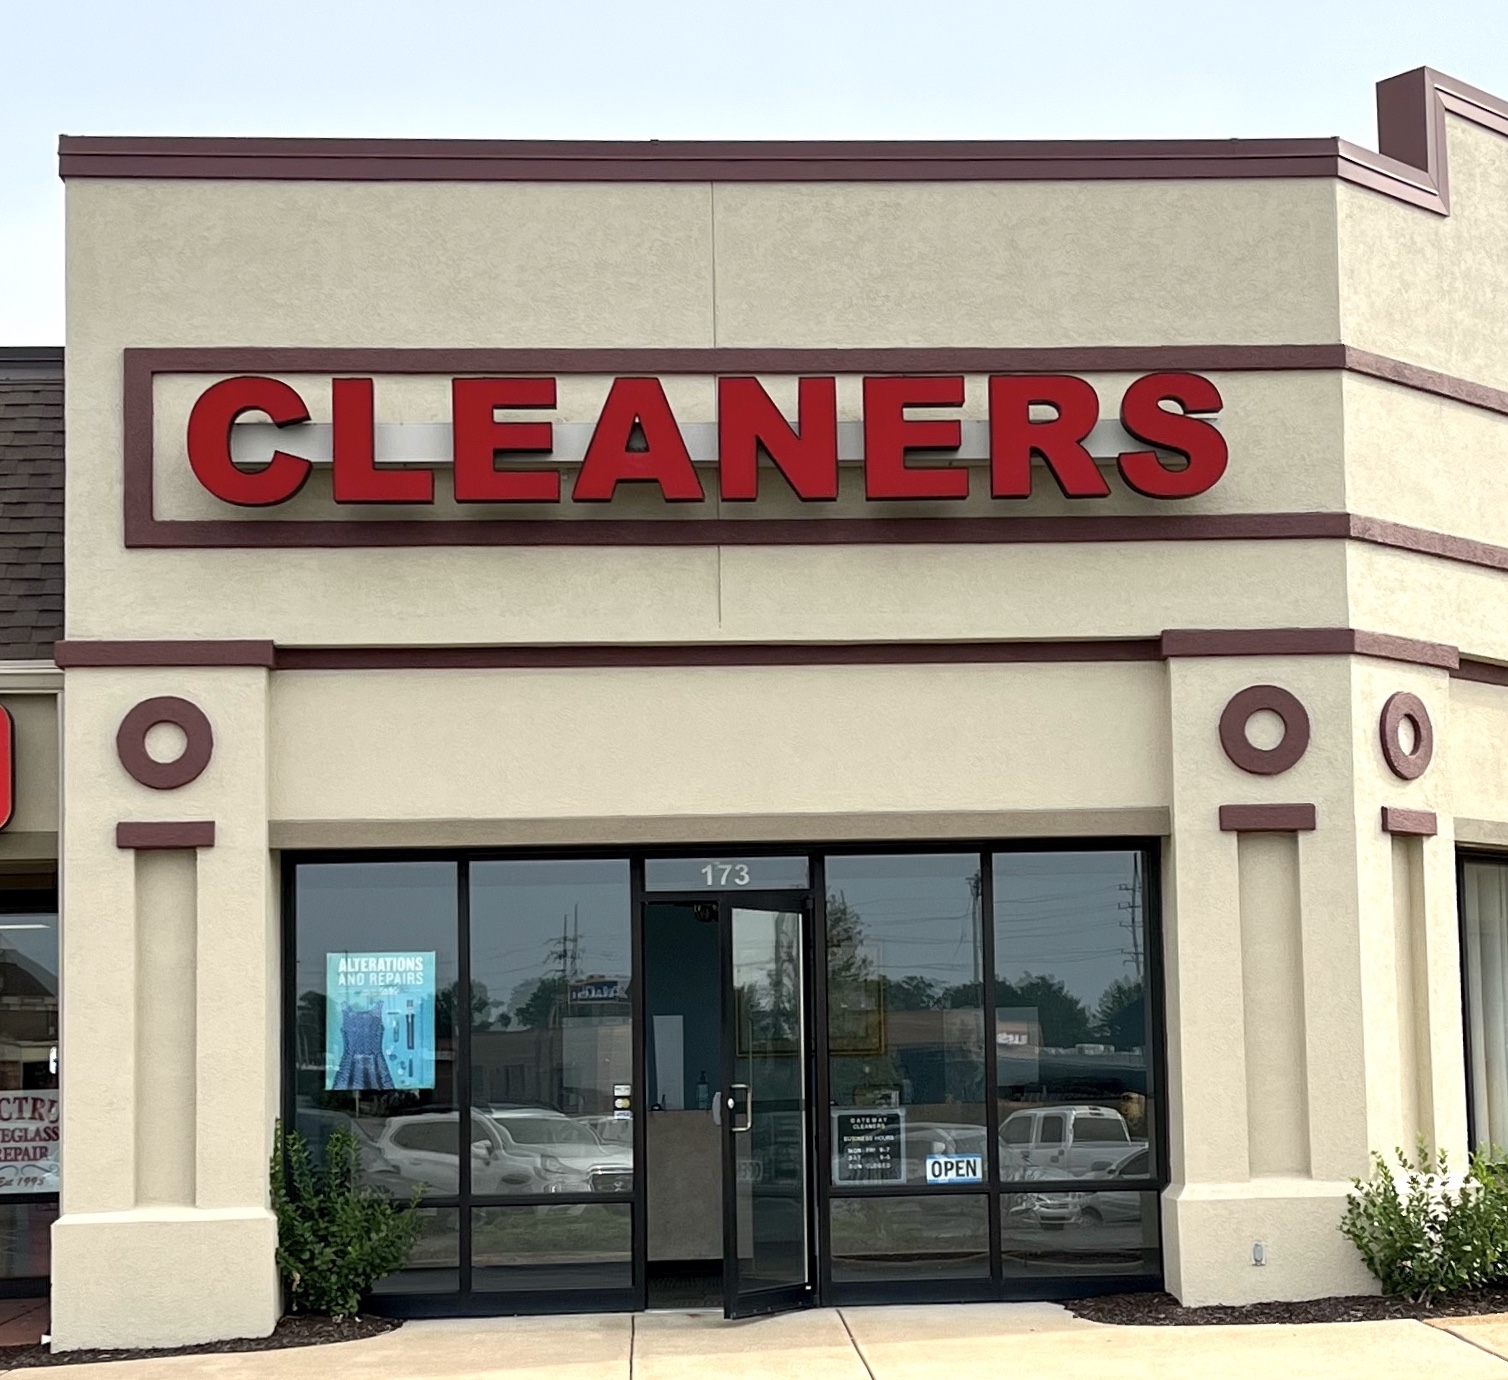 Gateway Cleaners building